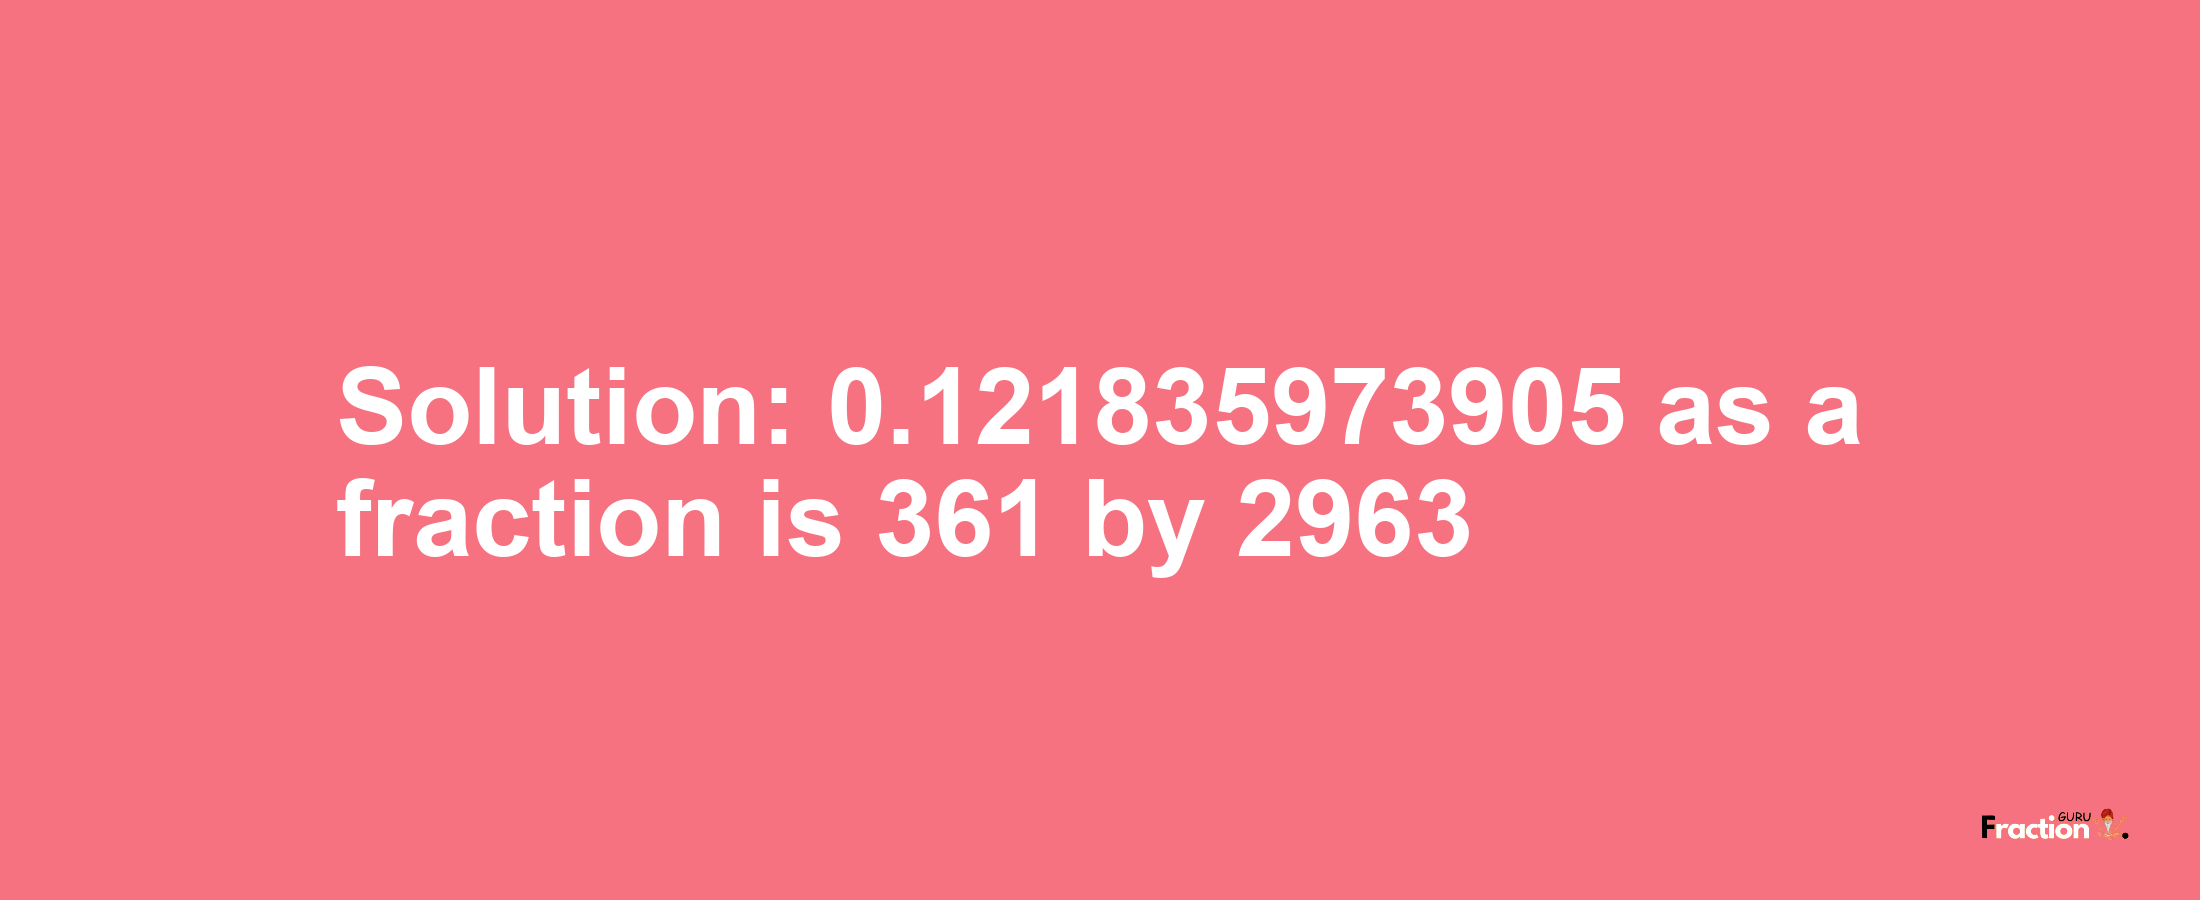 Solution:0.121835973905 as a fraction is 361/2963